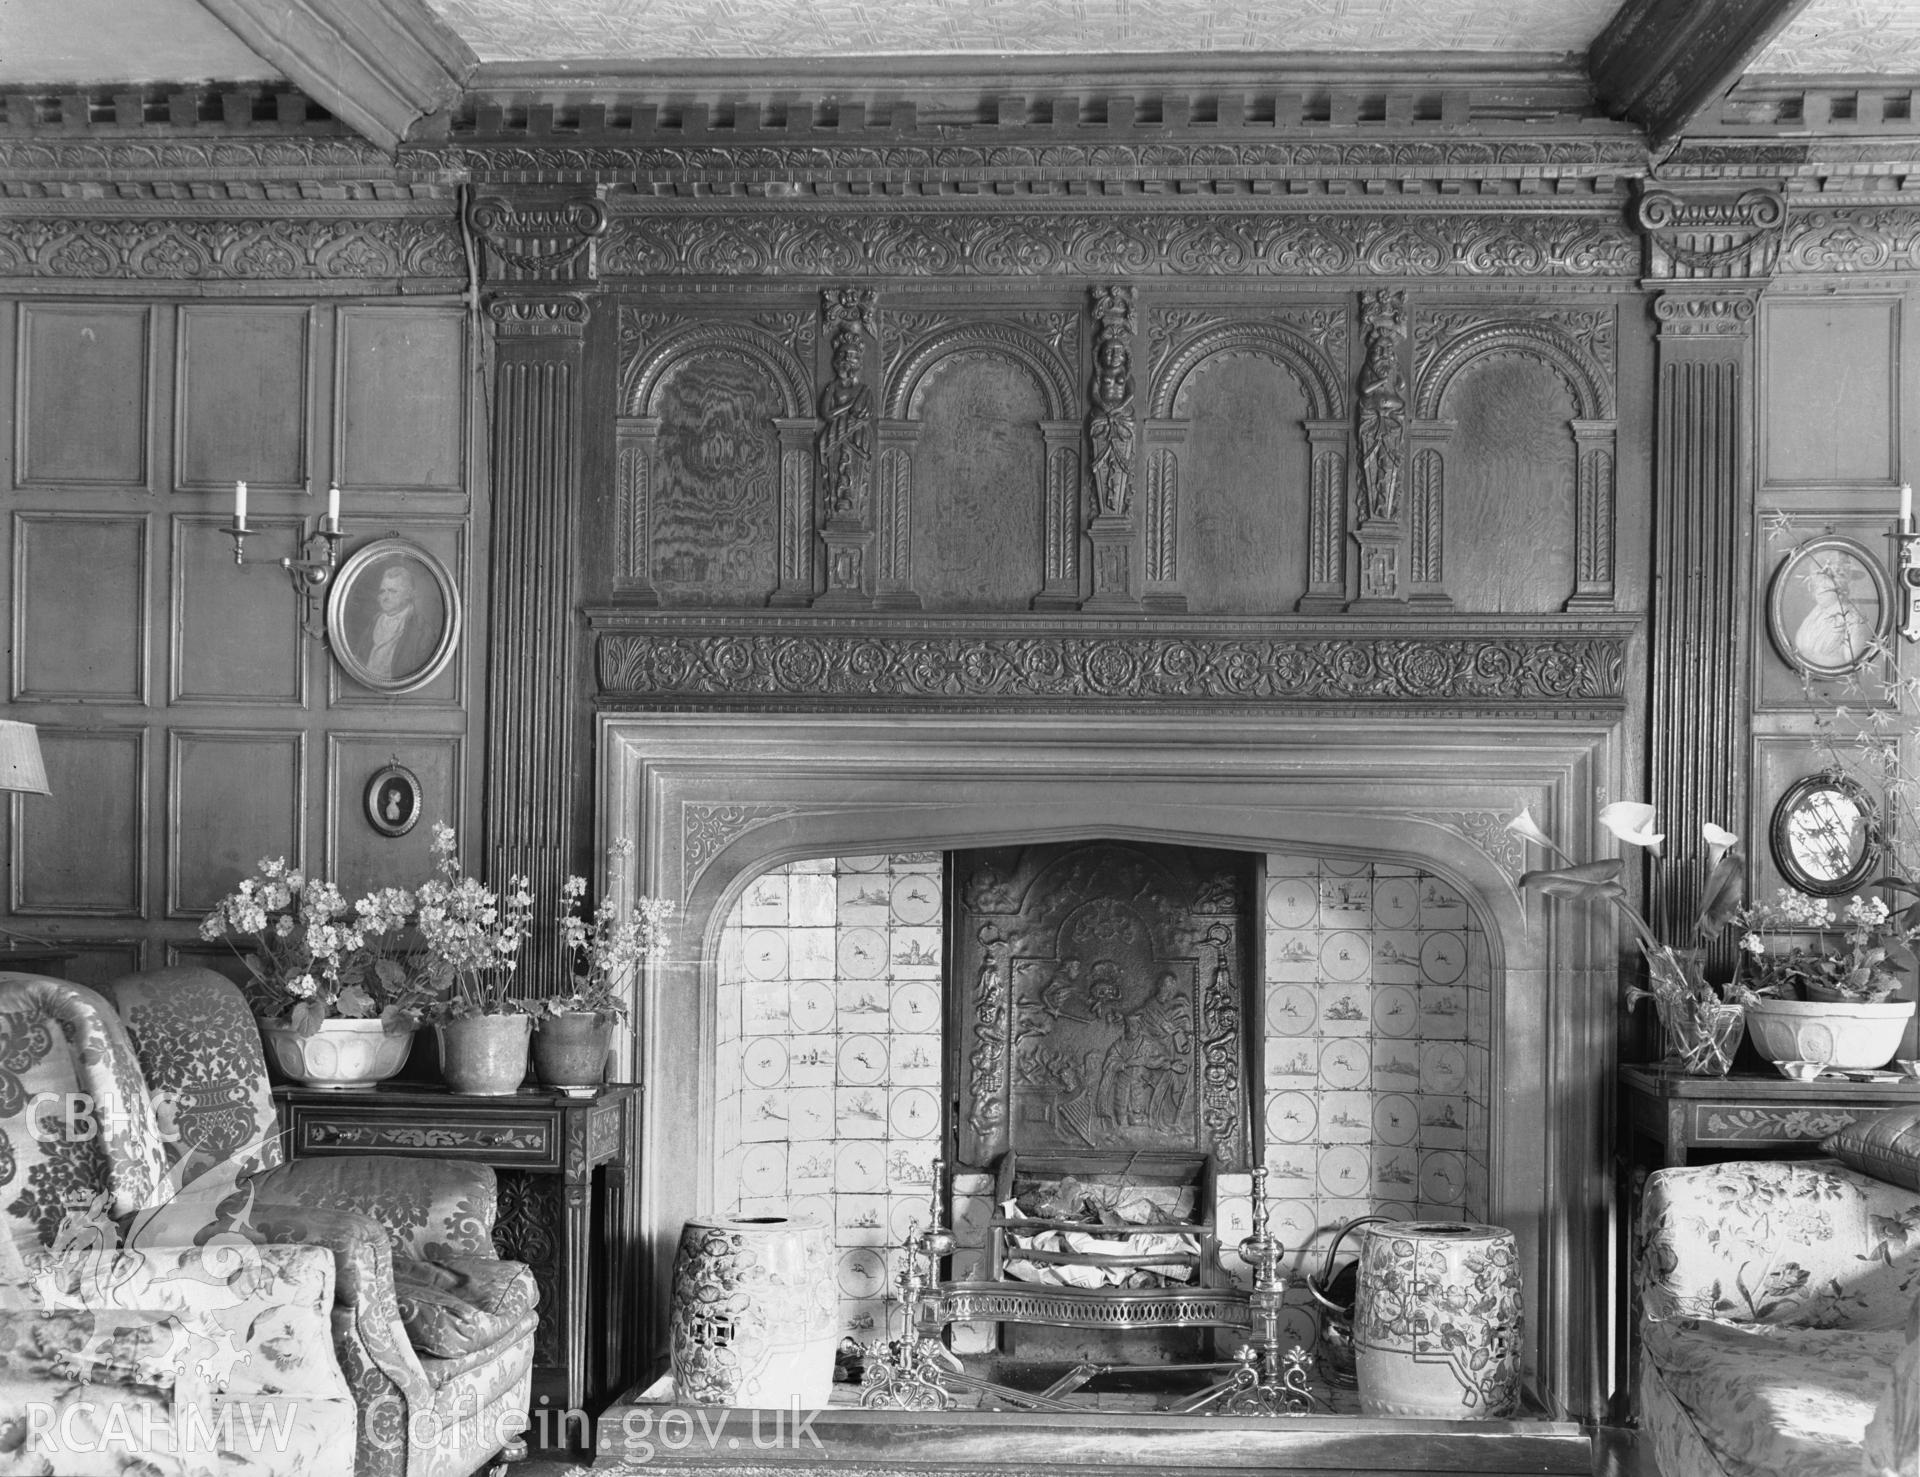 Interior view showing the fireplace in the drawing room.